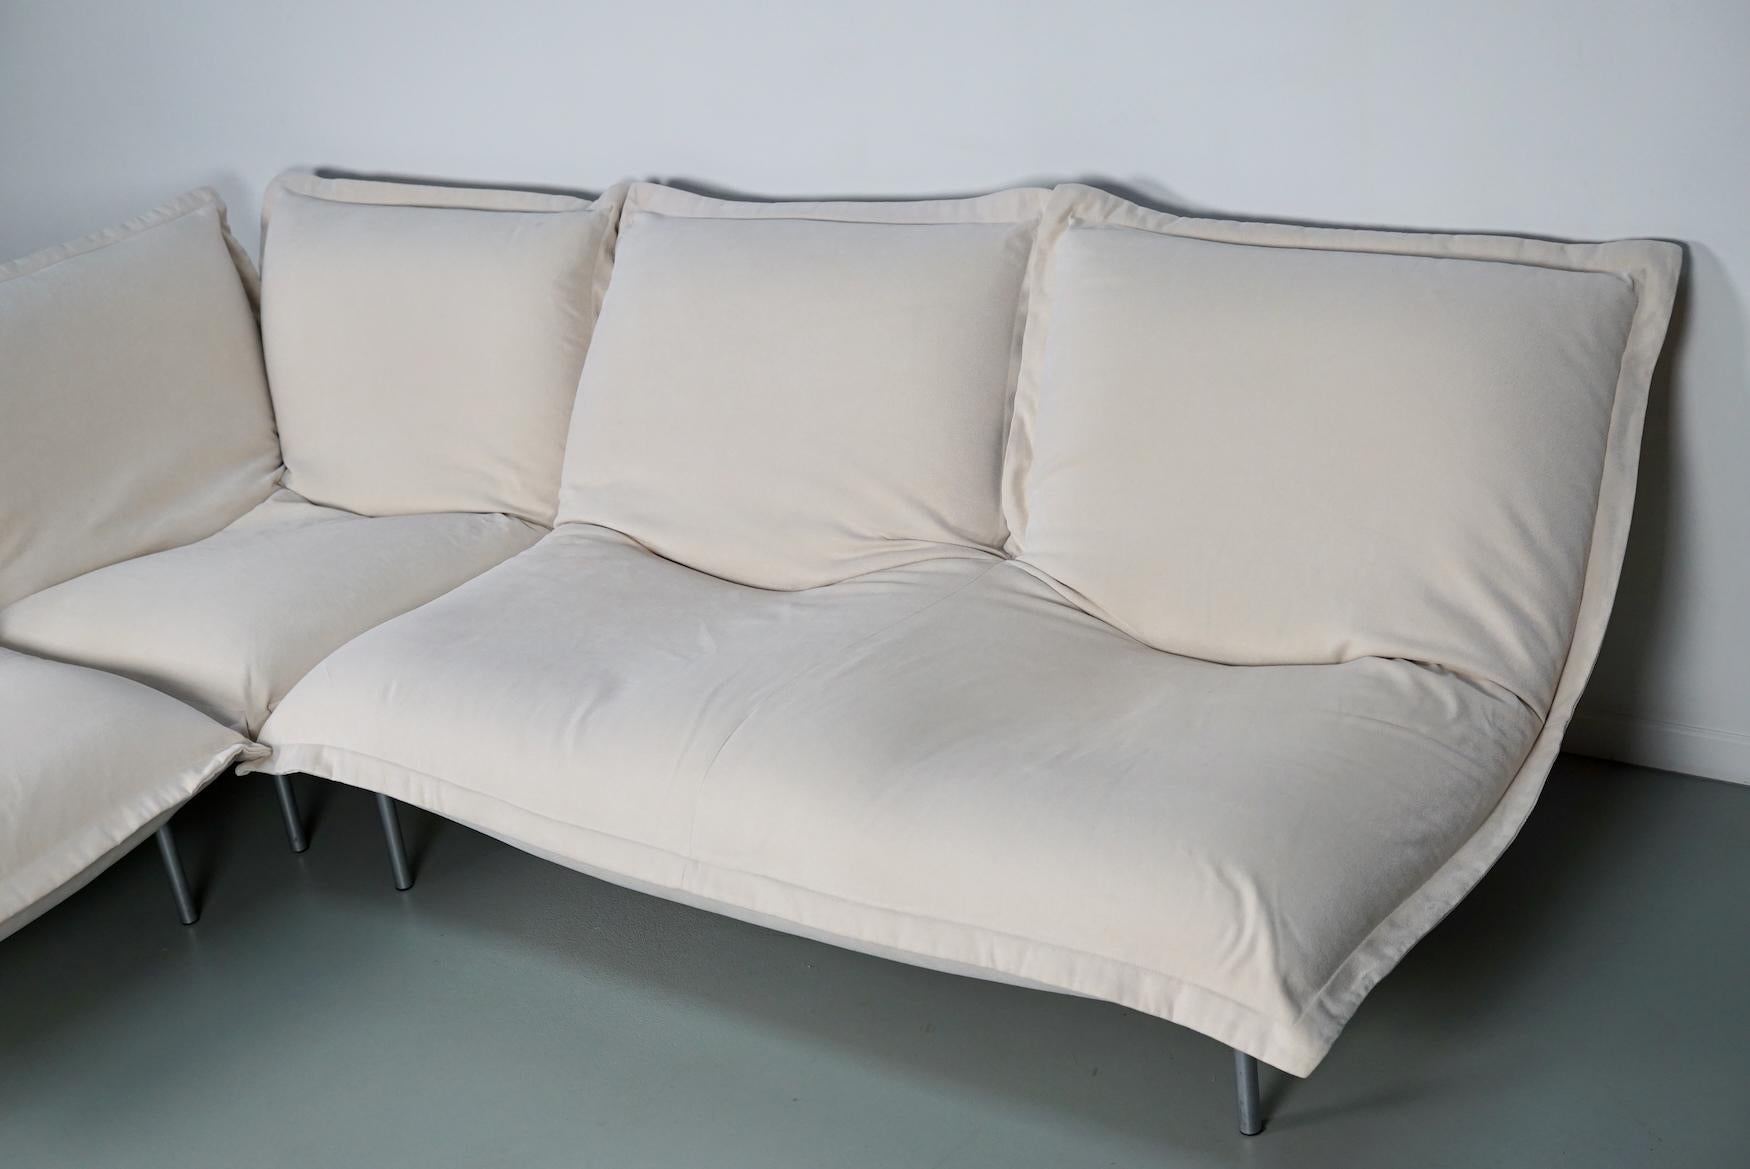 Calin Corner Sofa Set by Pascal Mourgue for Cinna / Ligne Roset - 4 seater For Sale 6